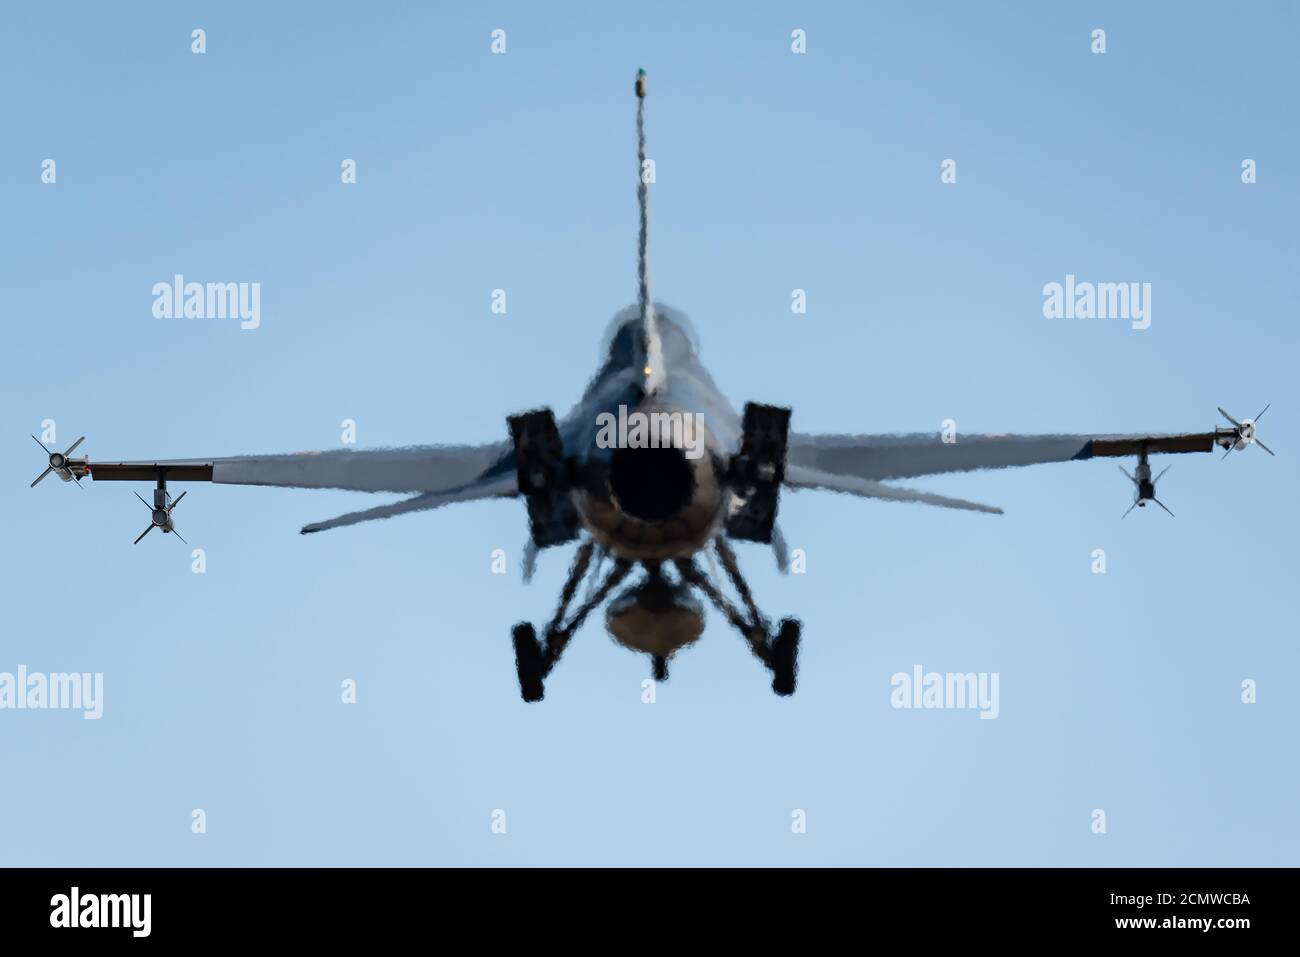 A F-16 fighter jet of the Belgian Air Force at the Kleine-Brogel airbase in Belgium. Stock Photo